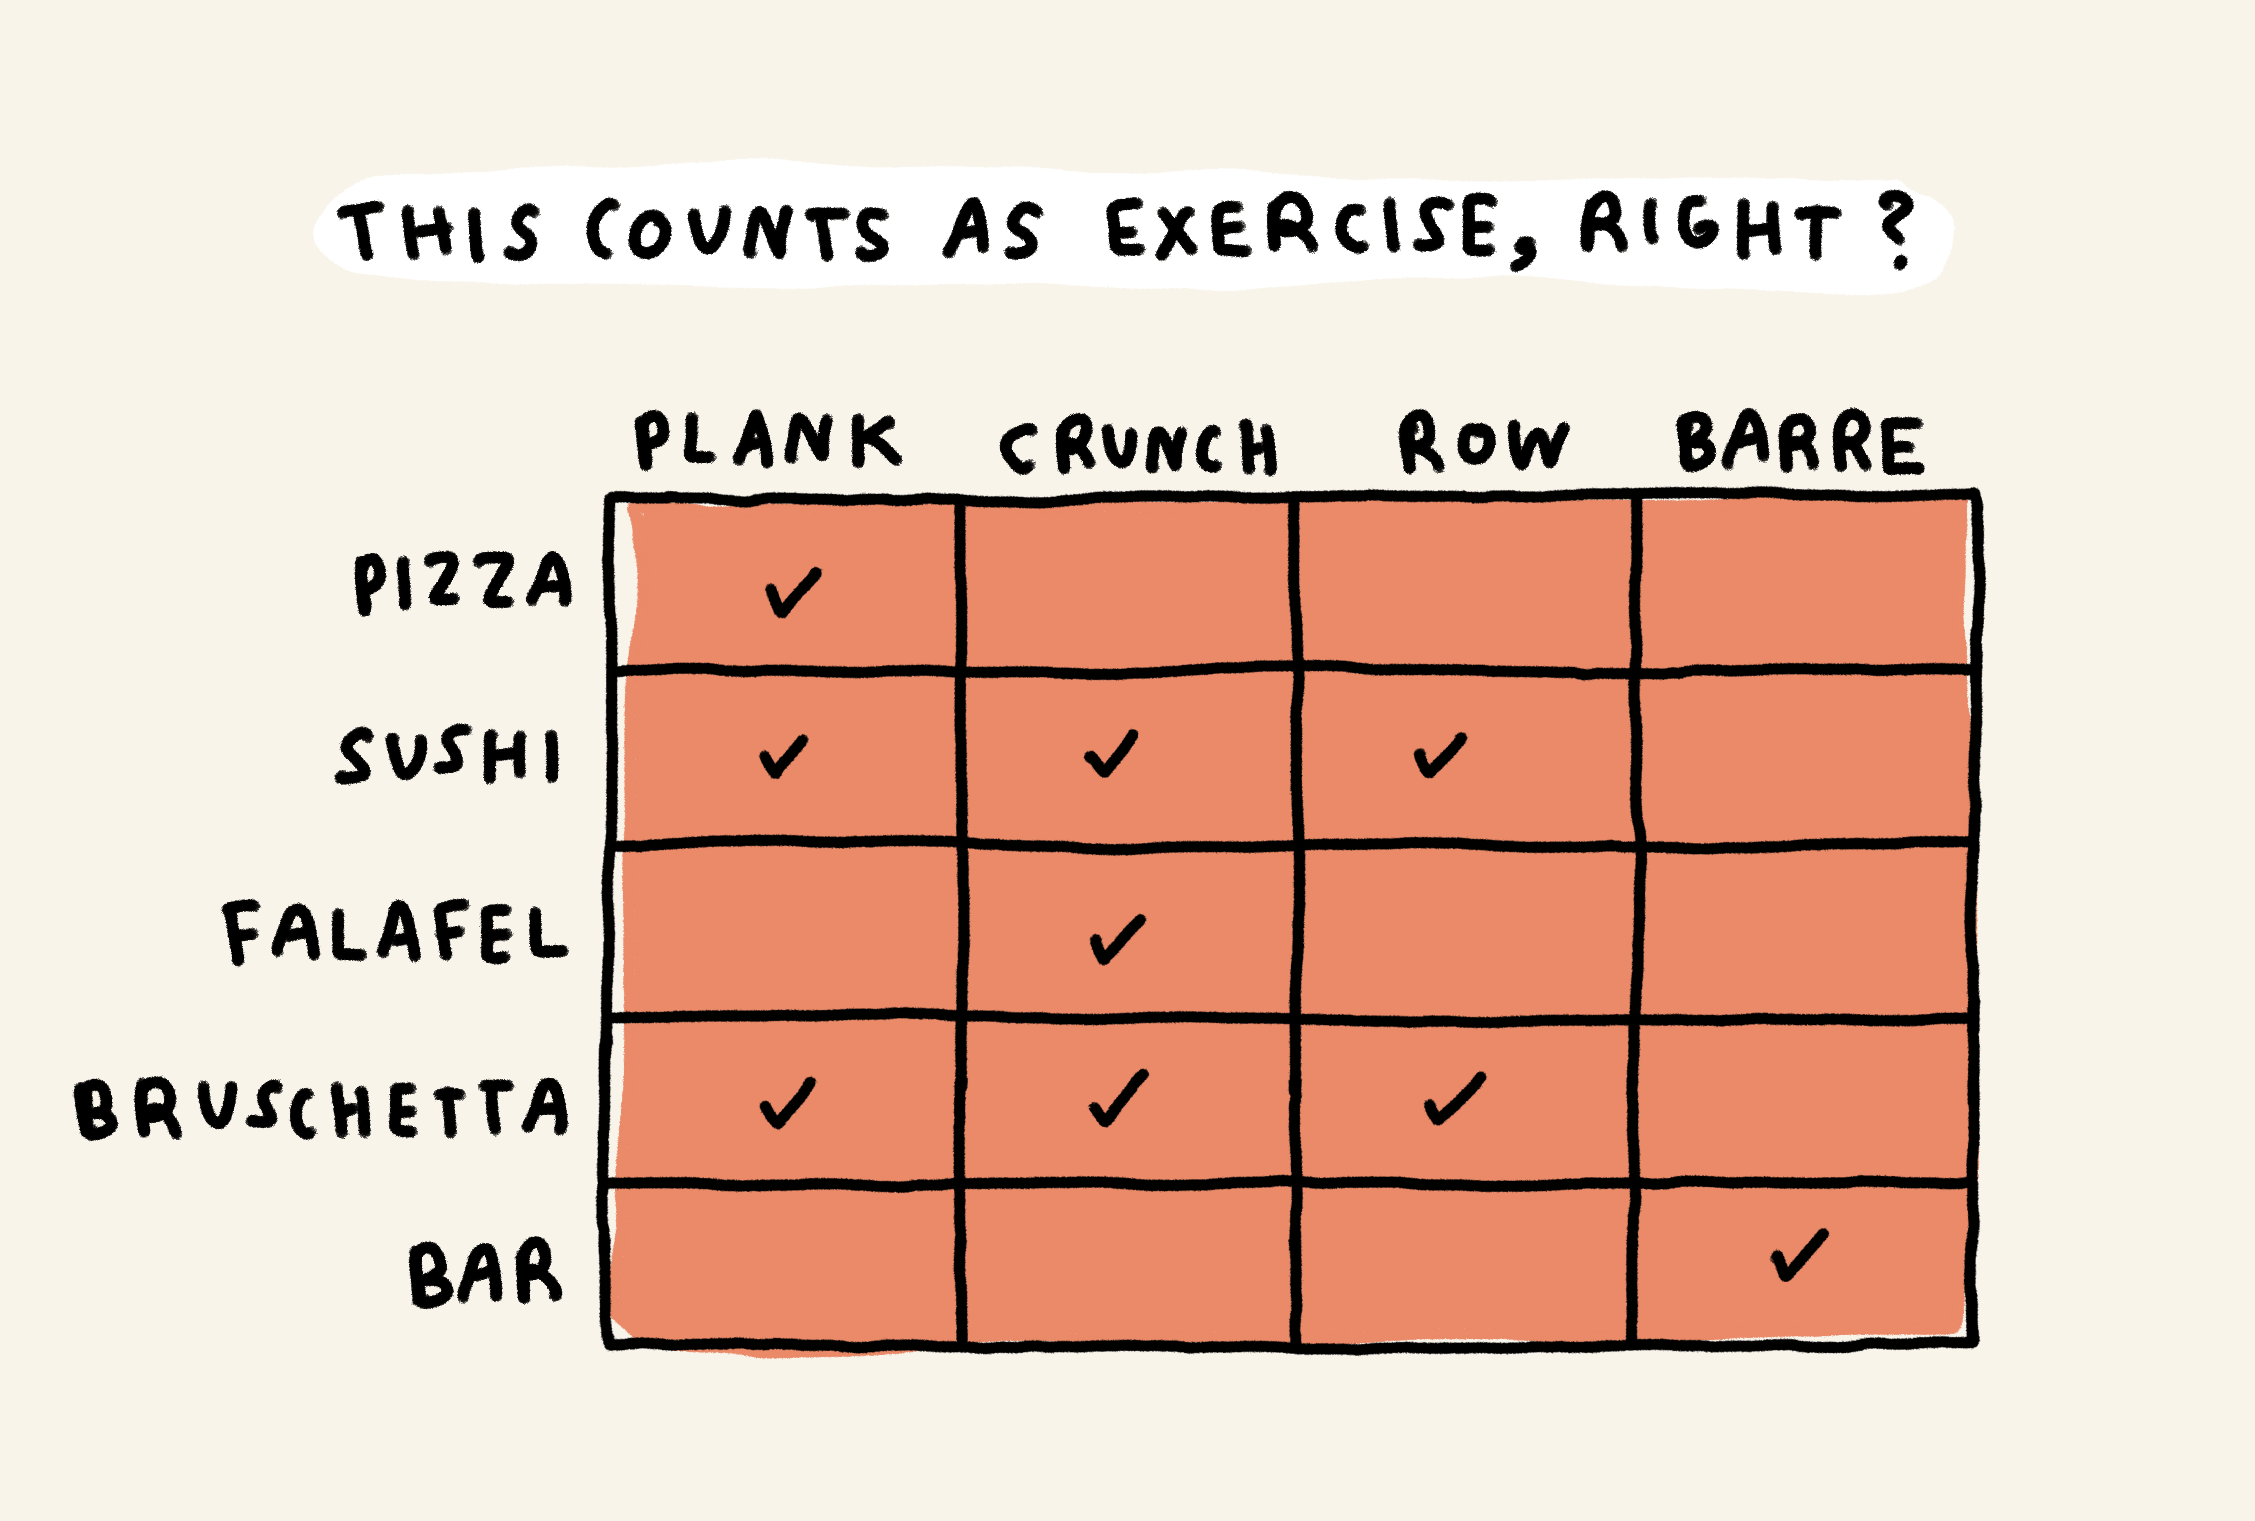 This counts as exercise, right?

Plank + pizza = ✓
Plank + sushi = ✓
Plank + falafel = blank
Plank + bruschetta = ✓
Plank + bar = blank

Crunch + pizza = blank
Crunch + sushi = ✓
Crunch + falafel = ✓
Crunch + bruschetta = ✓
Crunch + bar = blank

Row + pizza = blank
Row + sushi = ✓
Row + falafel = blank
Row + bruschetta = ✓
Row + bar = blank

Barre + pizza = blank
Barre + sushi = blank
Barre + falafel = blank
Barre + bruschetta = blank
Barre + bar = ✓